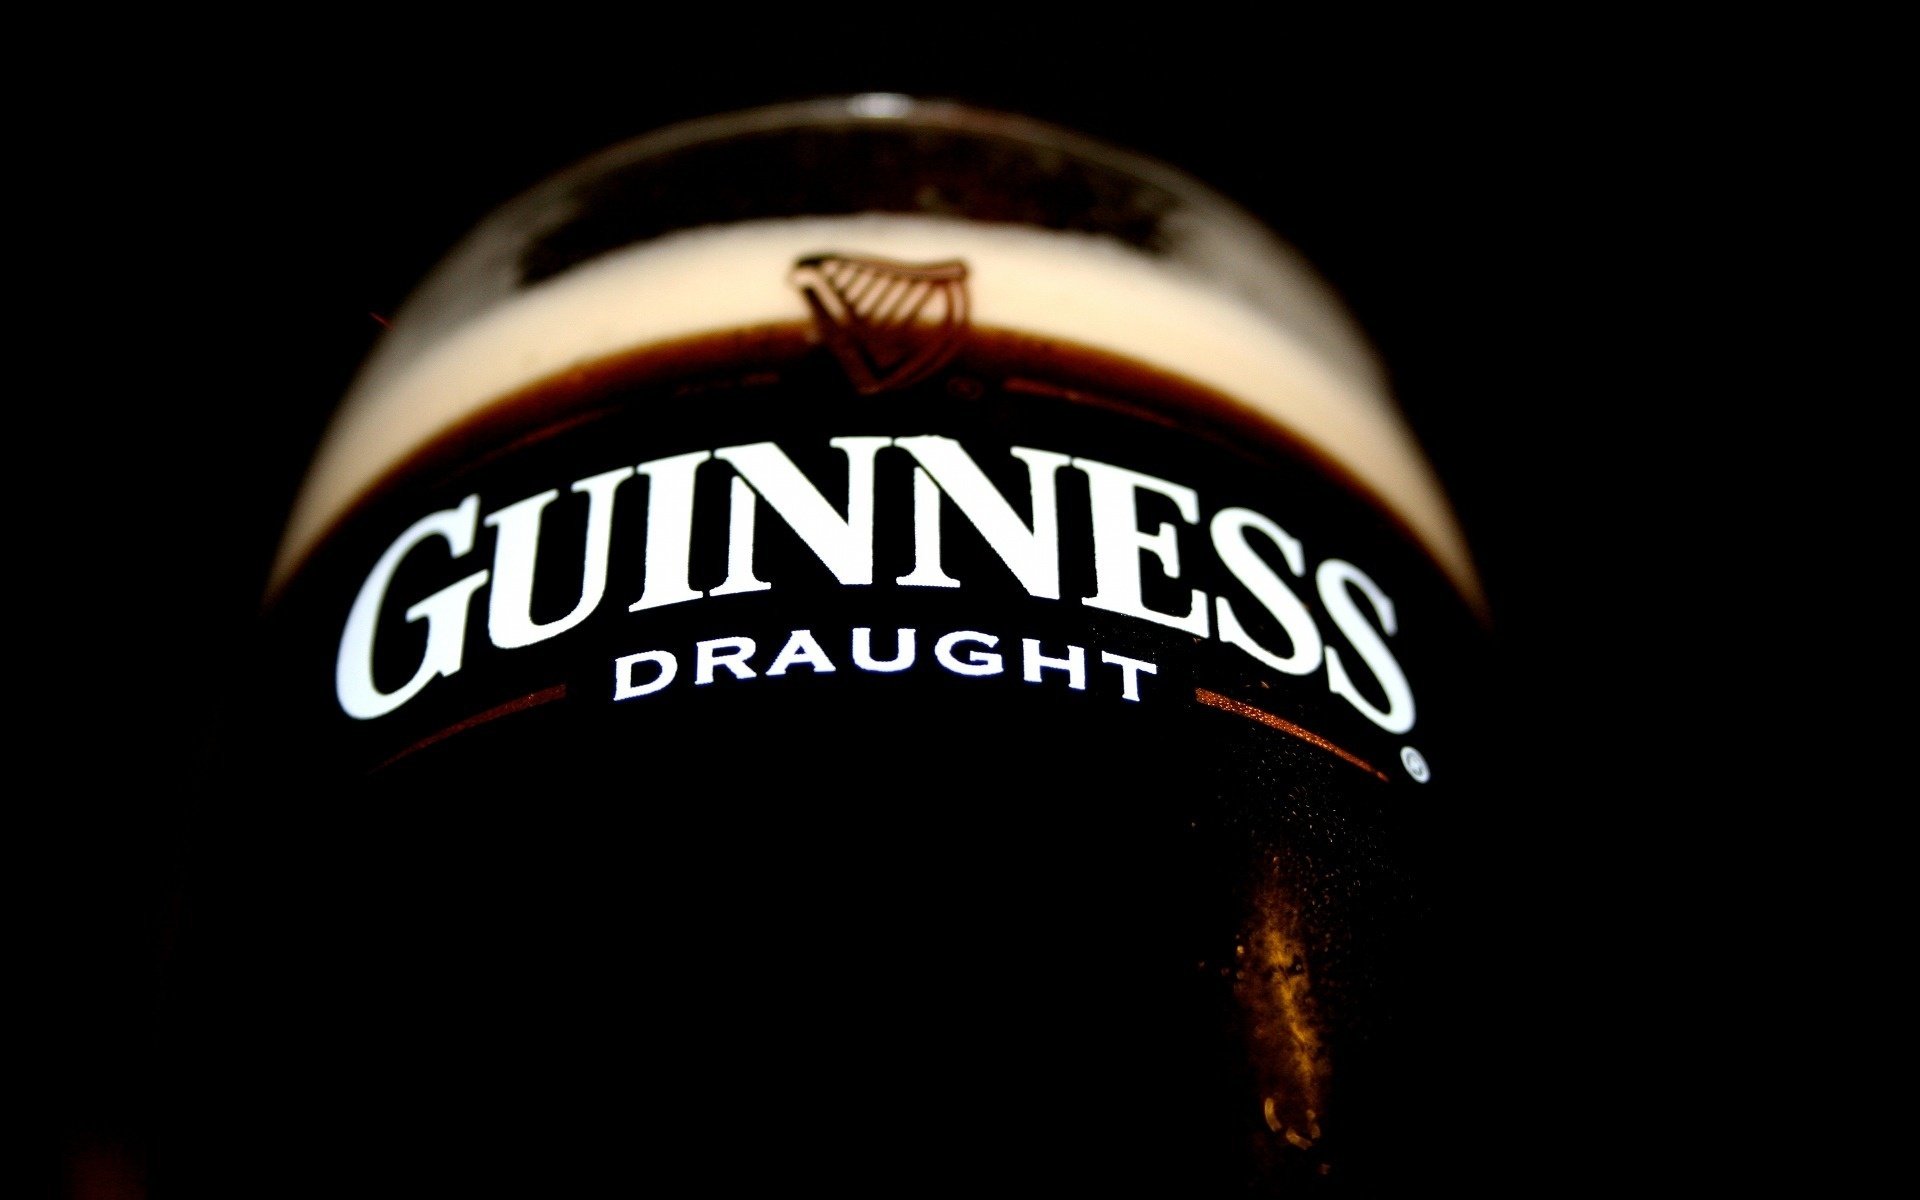 Guinness Wallpapers